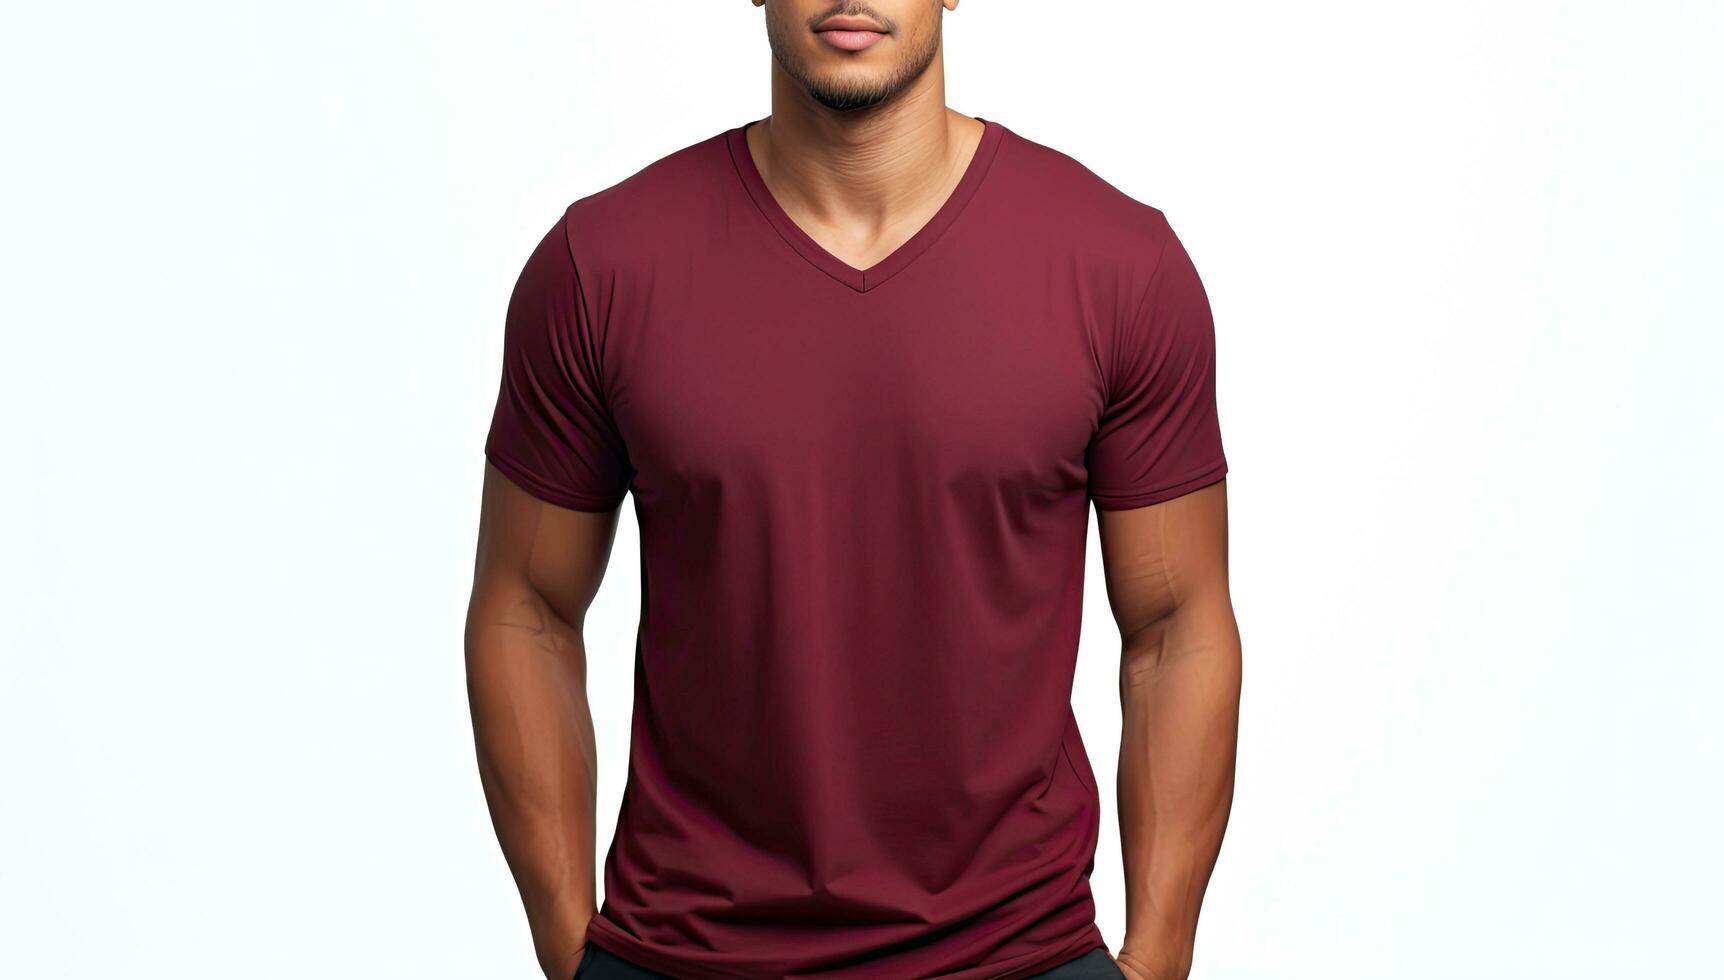 Cropped image of sportsman in red tshirt on white background, Male model wearing a dark maroon color VNeck tshirt on a White background, front view and back view, top section cropped, AI Generated photo